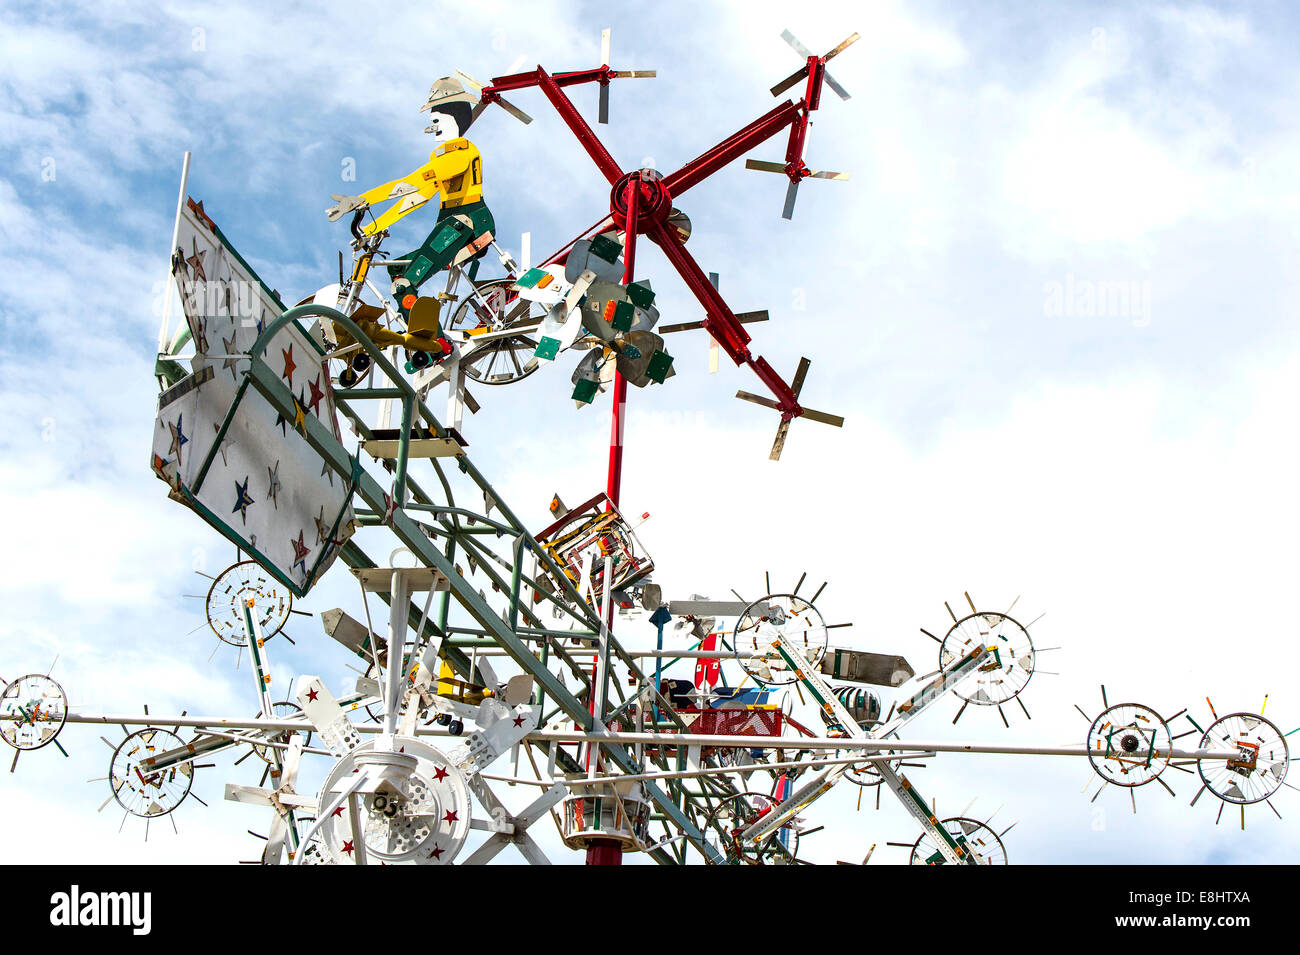 Wilson, North Carolina, USA. 08th Oct, 2014. Detail of one of five whirligigs by artist Vollis Simpson now up and twisting in the wind at Whirligig Park. Mr. Simpson, who died 2013 at the age of 94, made scores of whirligig sculptures over his lifetime, 31 of which will eventually be restored and installed at the park in Historic Downtown Wiilson. © Brian Cahn/ZUMA Wire/Alamy Live News Stock Photo